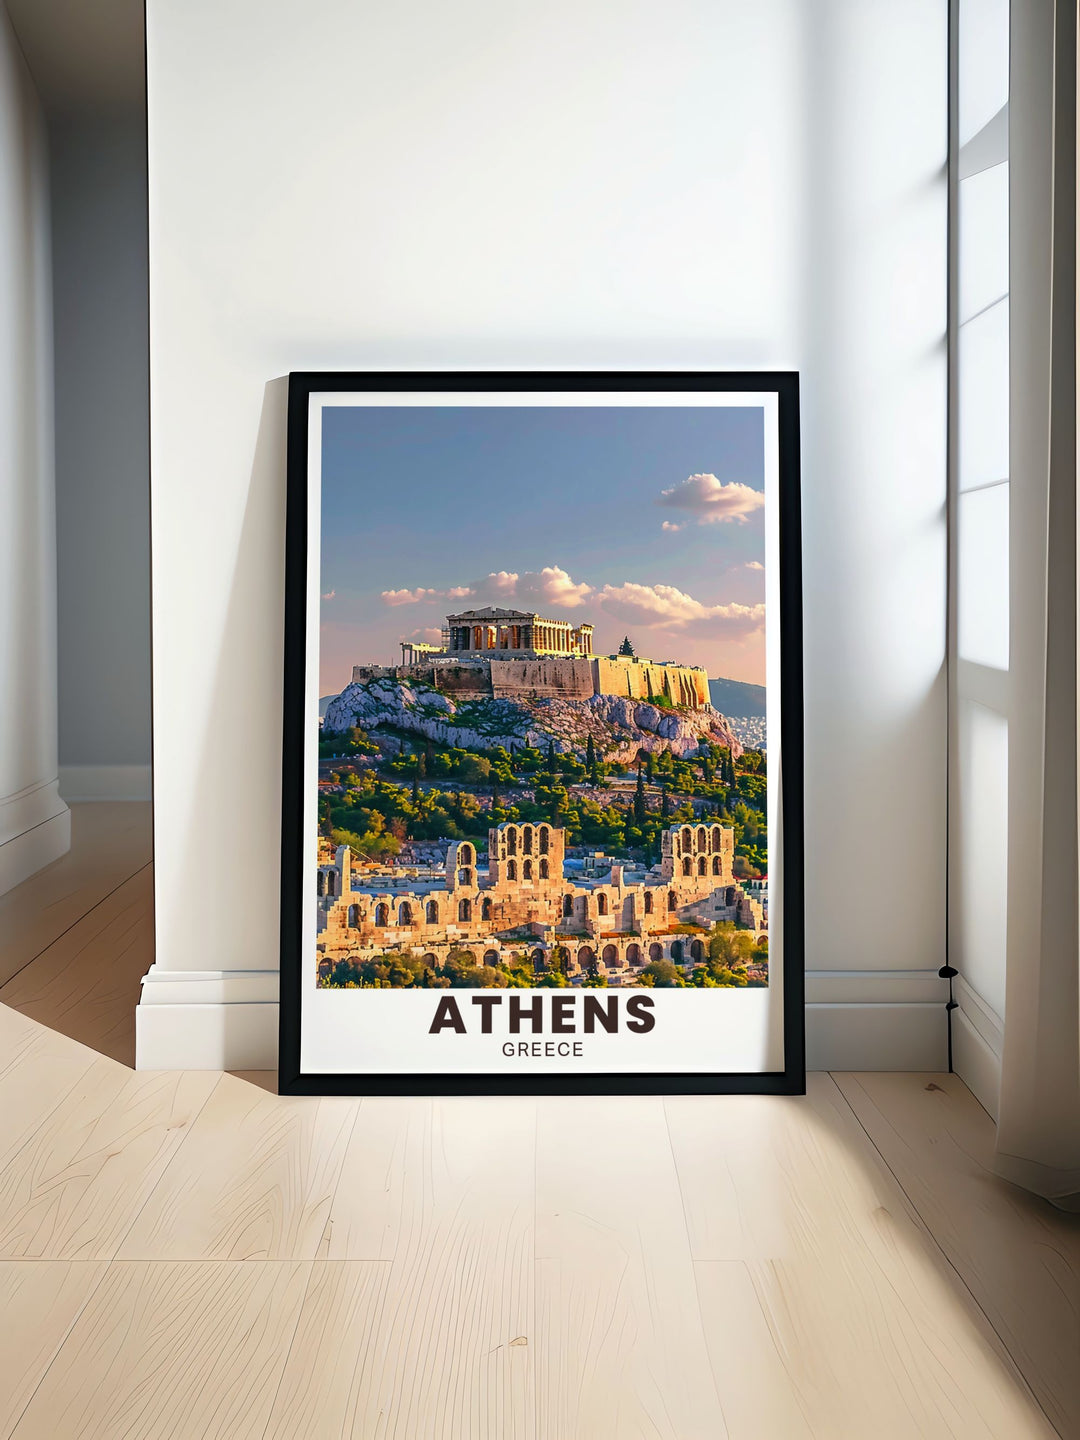 Athens Wall Art featuring the Acropolis of Athens with the Partheon showcasing the beauty of ancient Greek architecture in vibrant colors ideal for home decor and traveler gifts perfect for adding historical elegance to any space